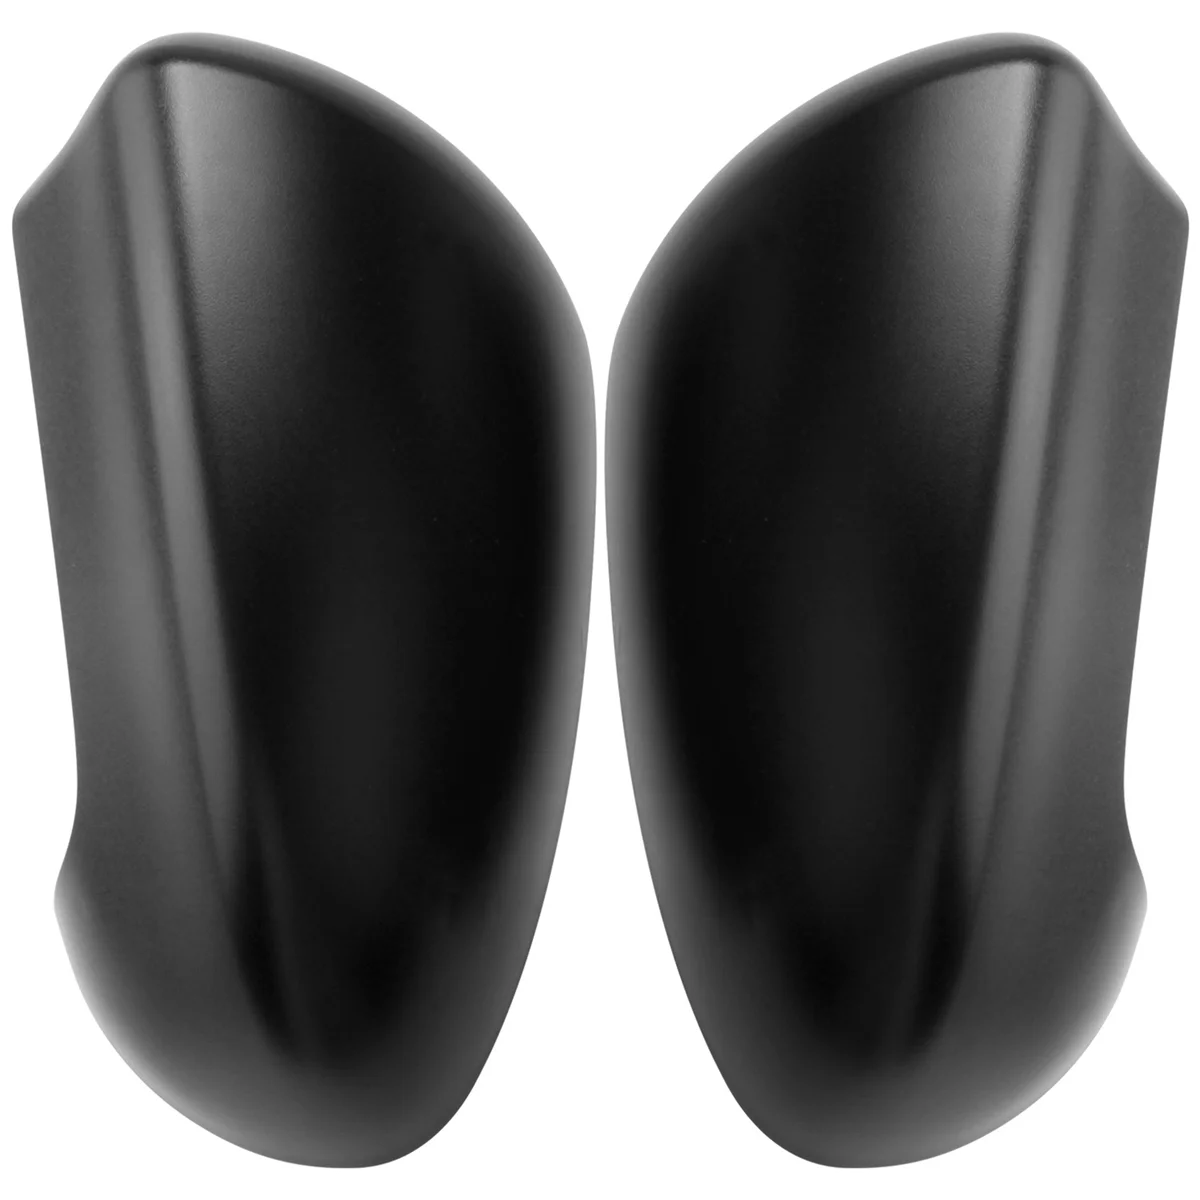 

2Pcs for Nissan Qashqai 2007-2014 Side Door Rearview Mirror Cover Trims Car Accessories Left +Right